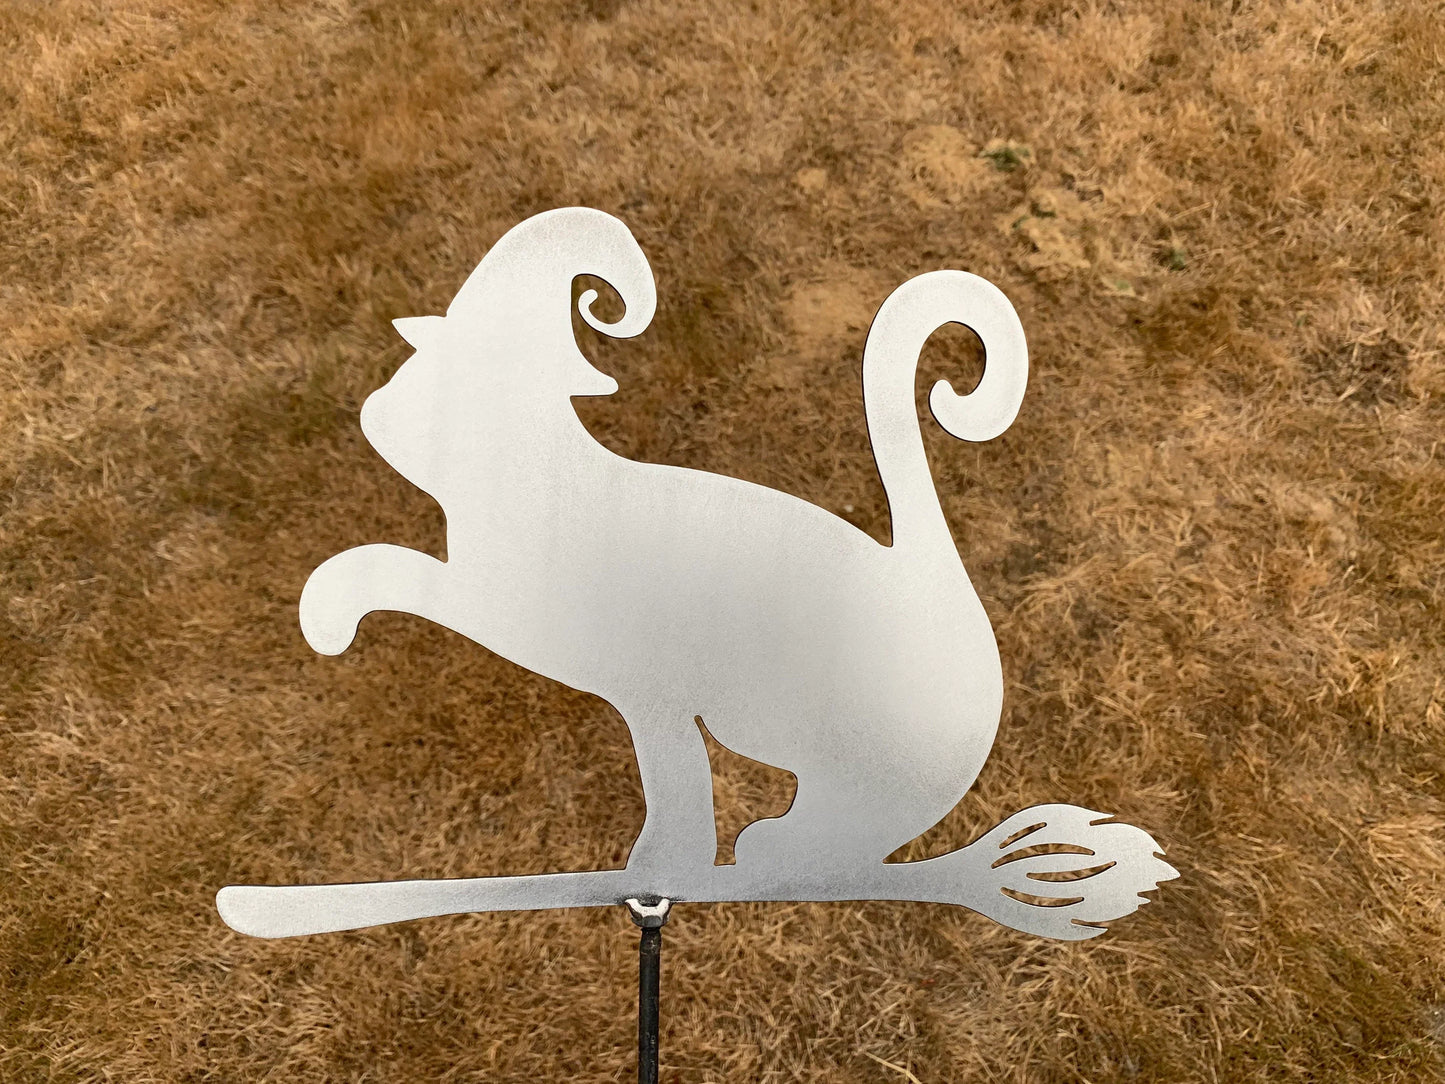 Metal Halloween Art Cat with witch hat flying on broom Stake Decoration , Garden Art, Yard Art, Hand Made, Fall Decor, Outdoor Garden Decor, Post Mount Bracket, Wall Mount w/(Holes)